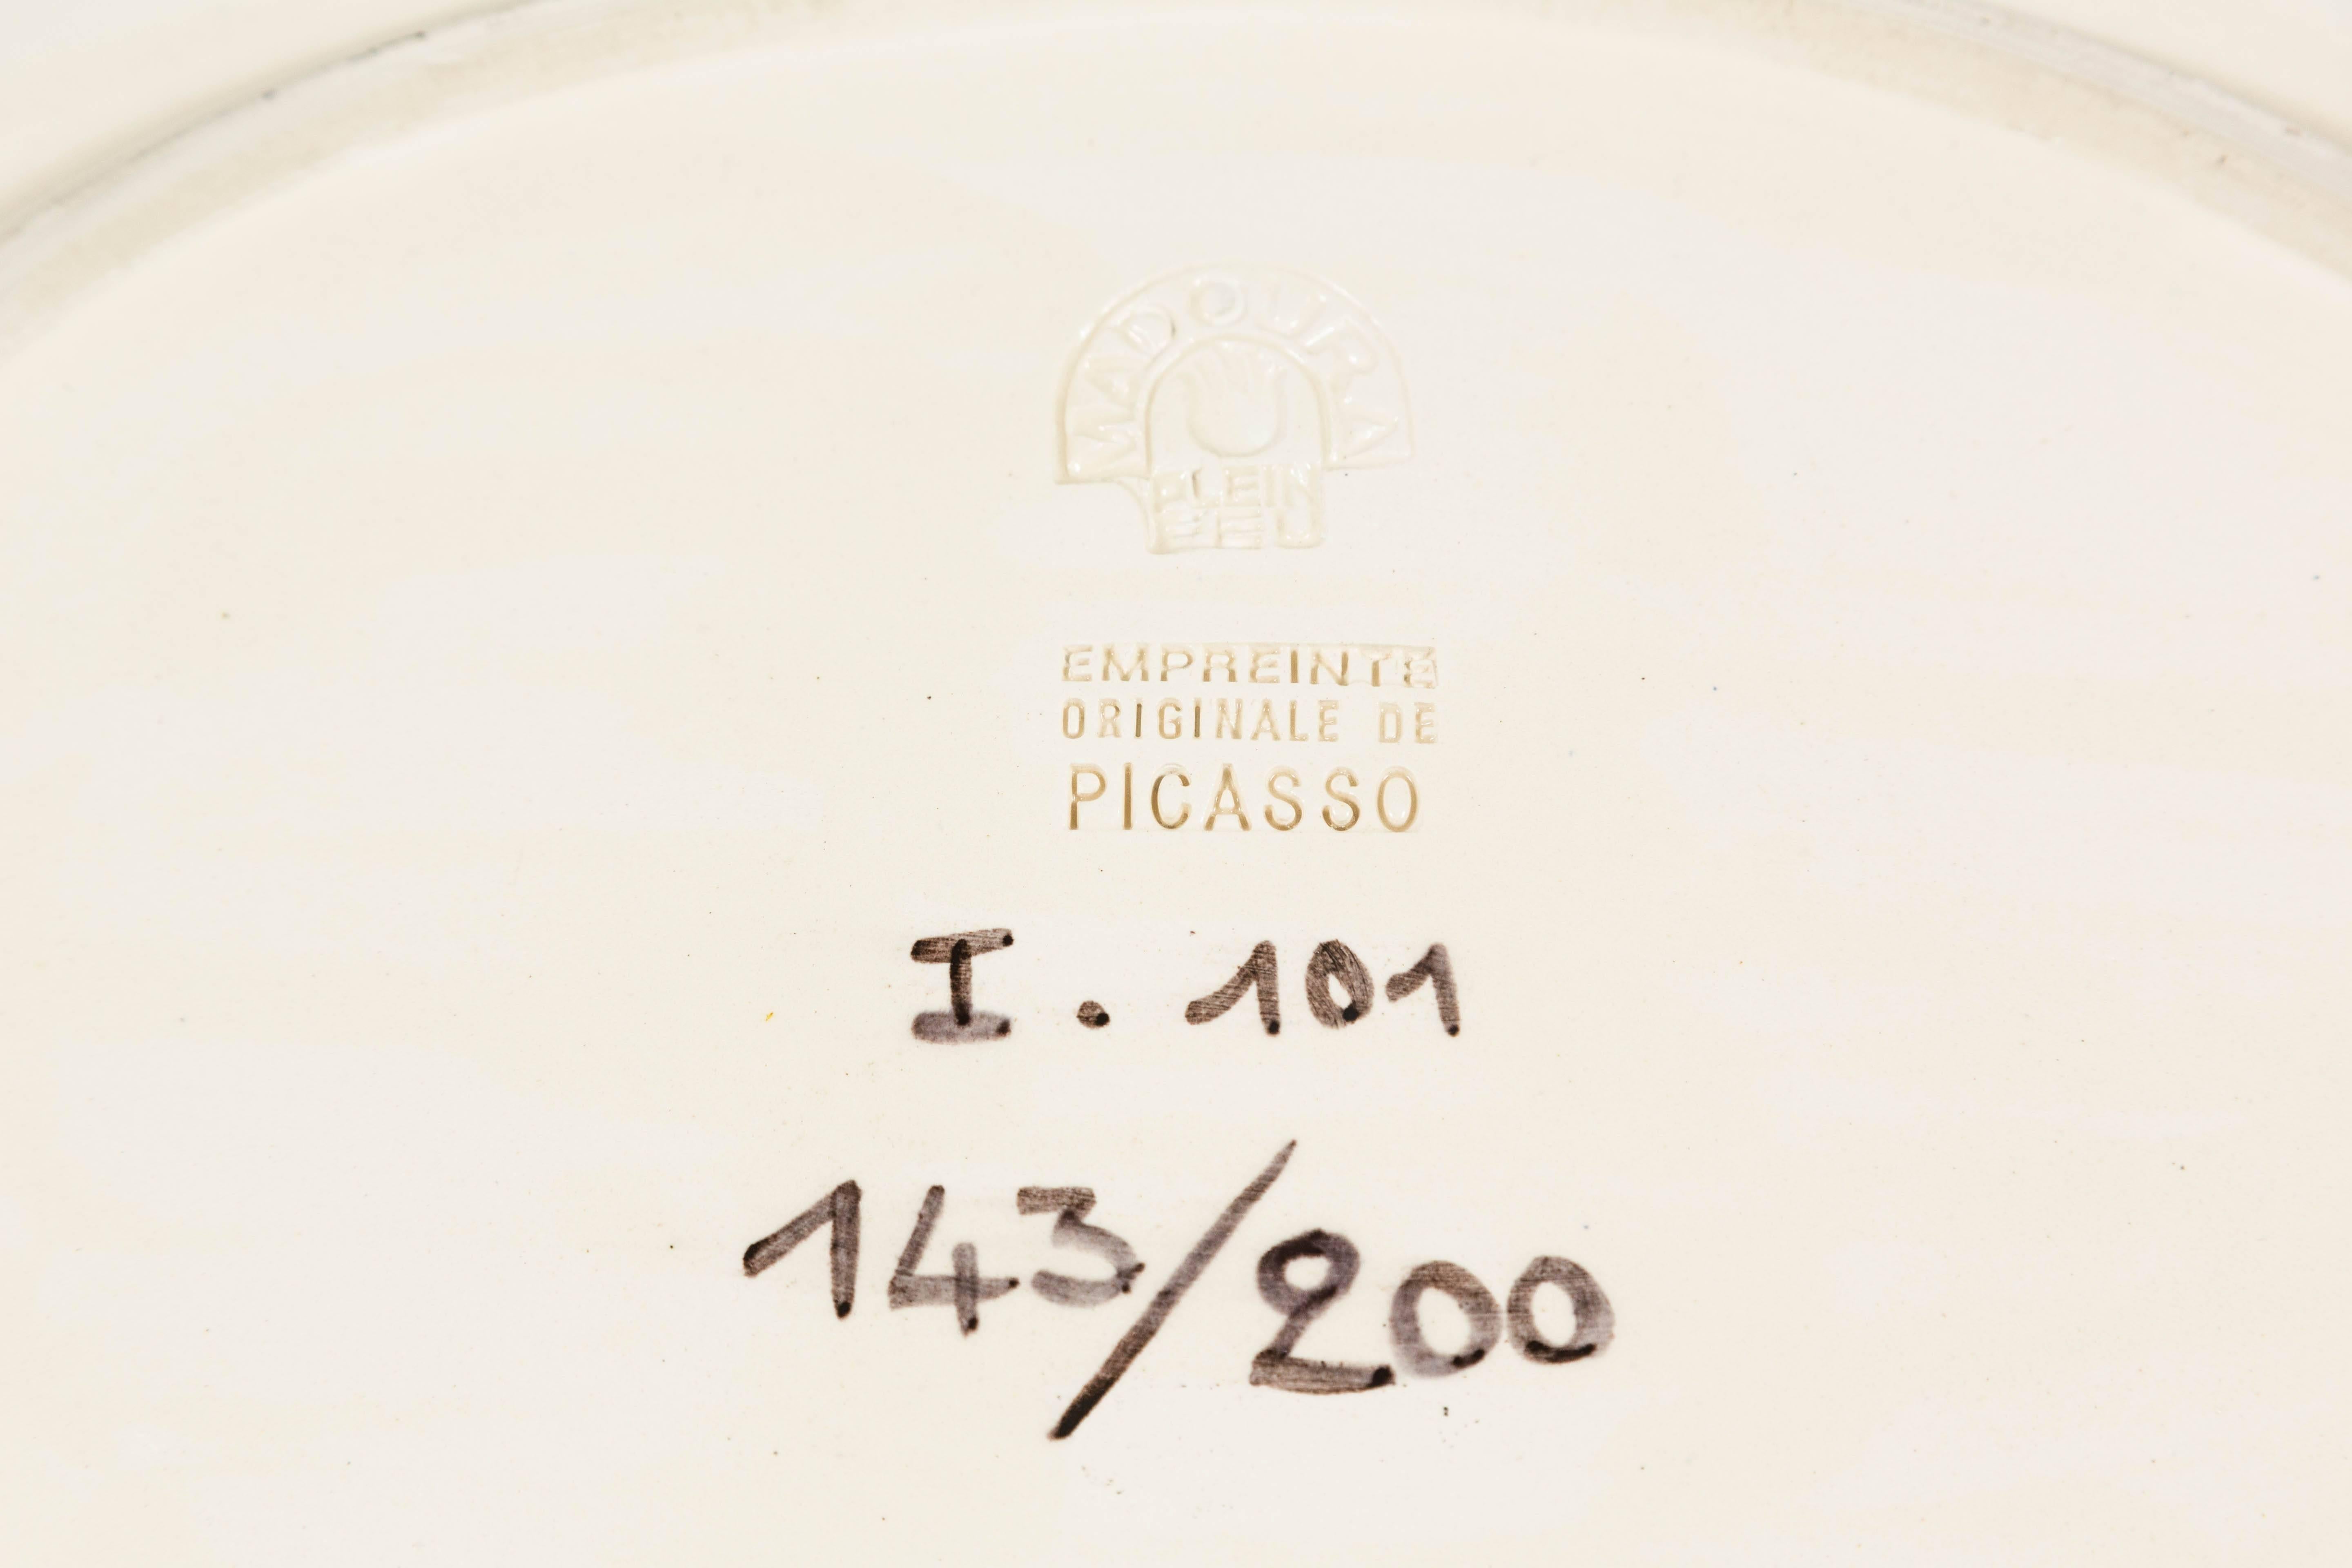 Beautiful 'Poisson Bleu' Madoura ceramic plate, by Pablo Picasso. Partial glazed ceramic plate, numbered from the edition of 200. White earthenware clay, decorated in engobes and enamel. Underglaze blue, green, and black. Marked, stamped, and